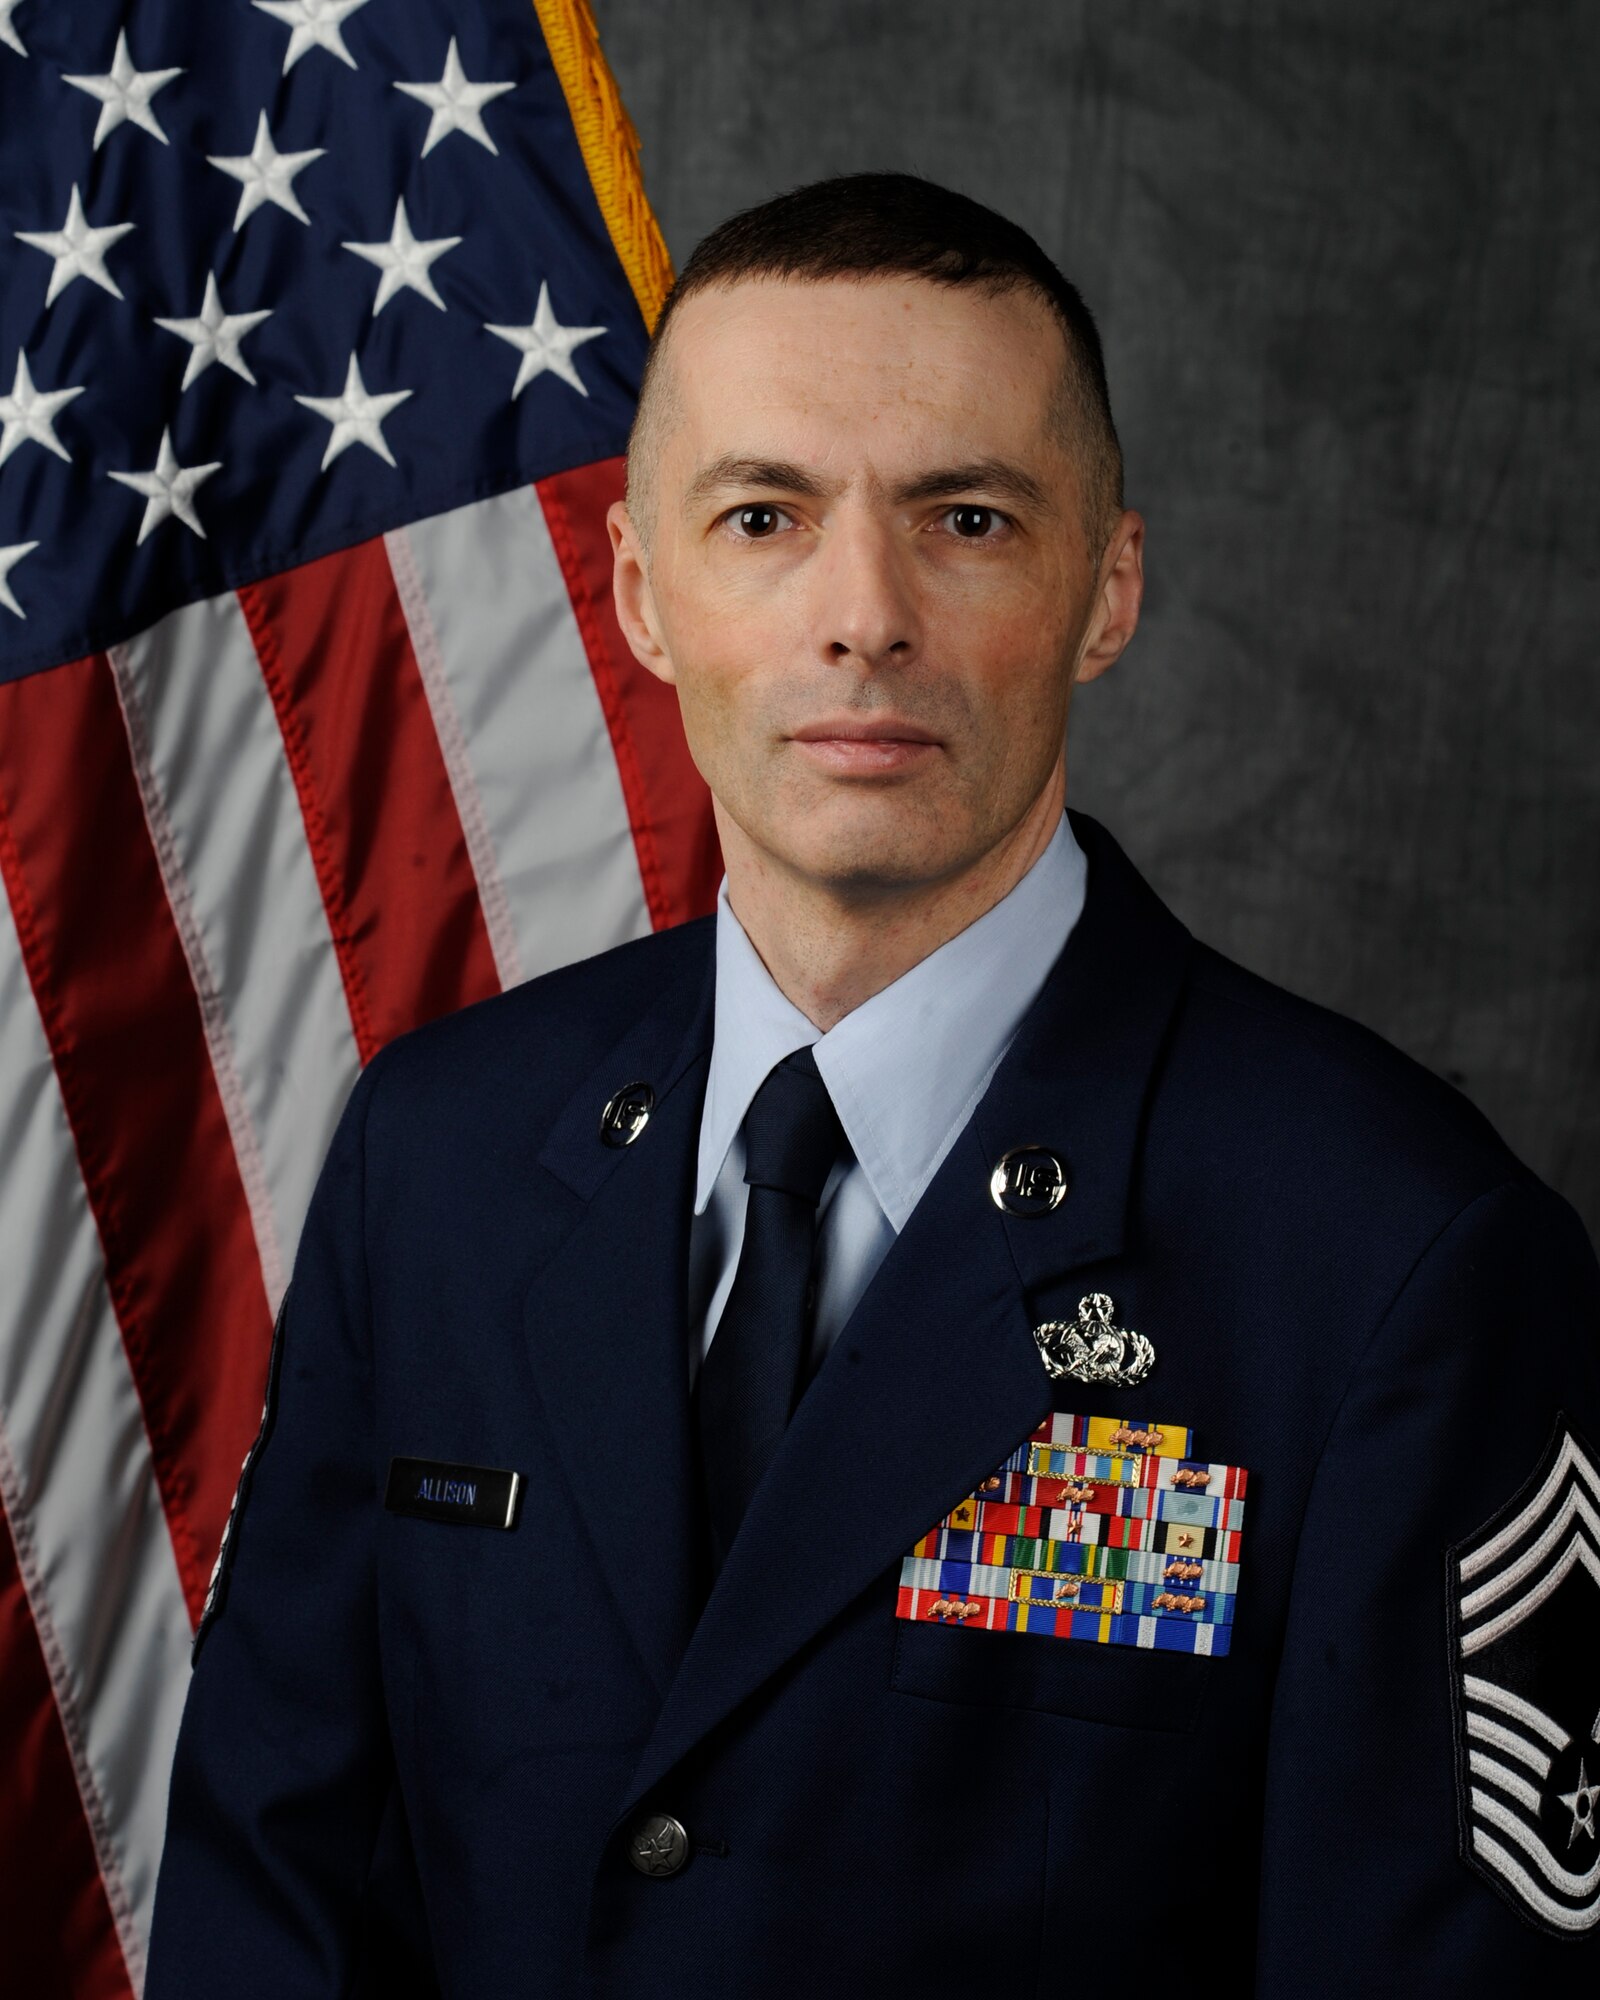 Chief Master Sgt. Stuart Allison is the command chief of the 509th Mission Support Group at Whiteman Air Force Base, Mo. He is currently deployed with the 407th Air Expeditionary Group as its superintendent. (U.S. Air Force photo by Airman 1st Class Keenan Berry/Released)